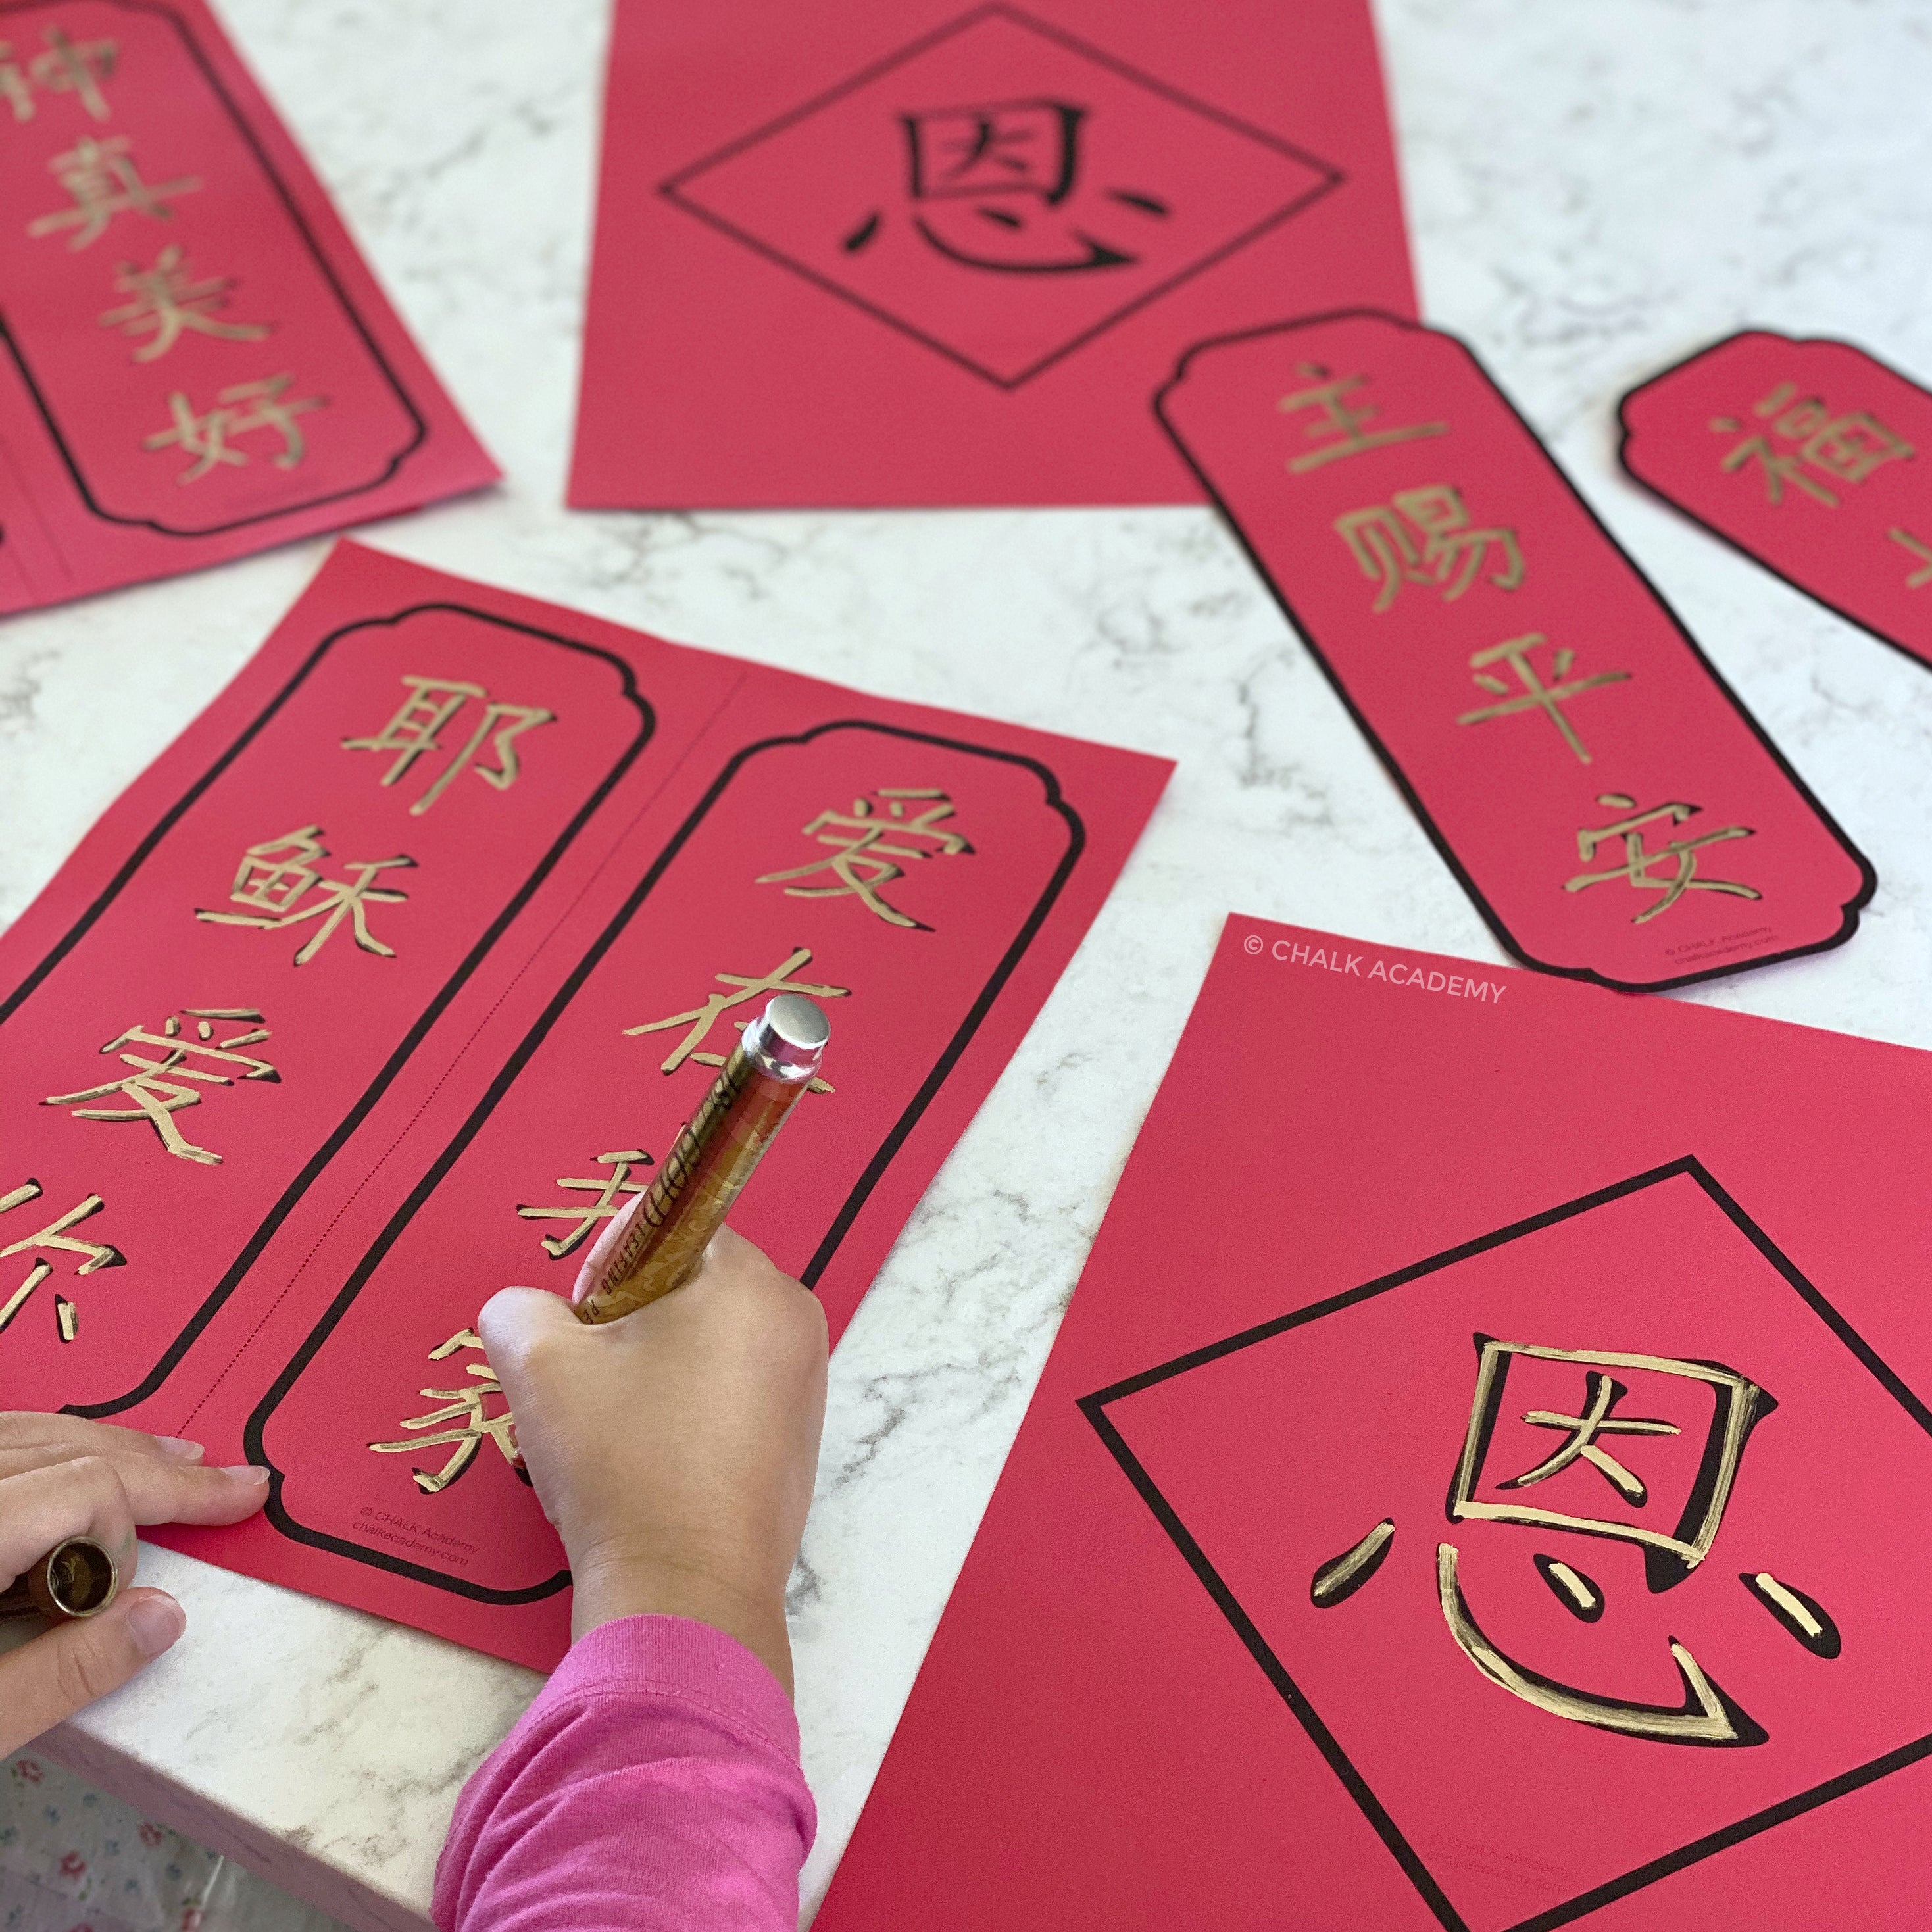 Set Of Flat Design Chinese New Year Banners. The Set Can Be used